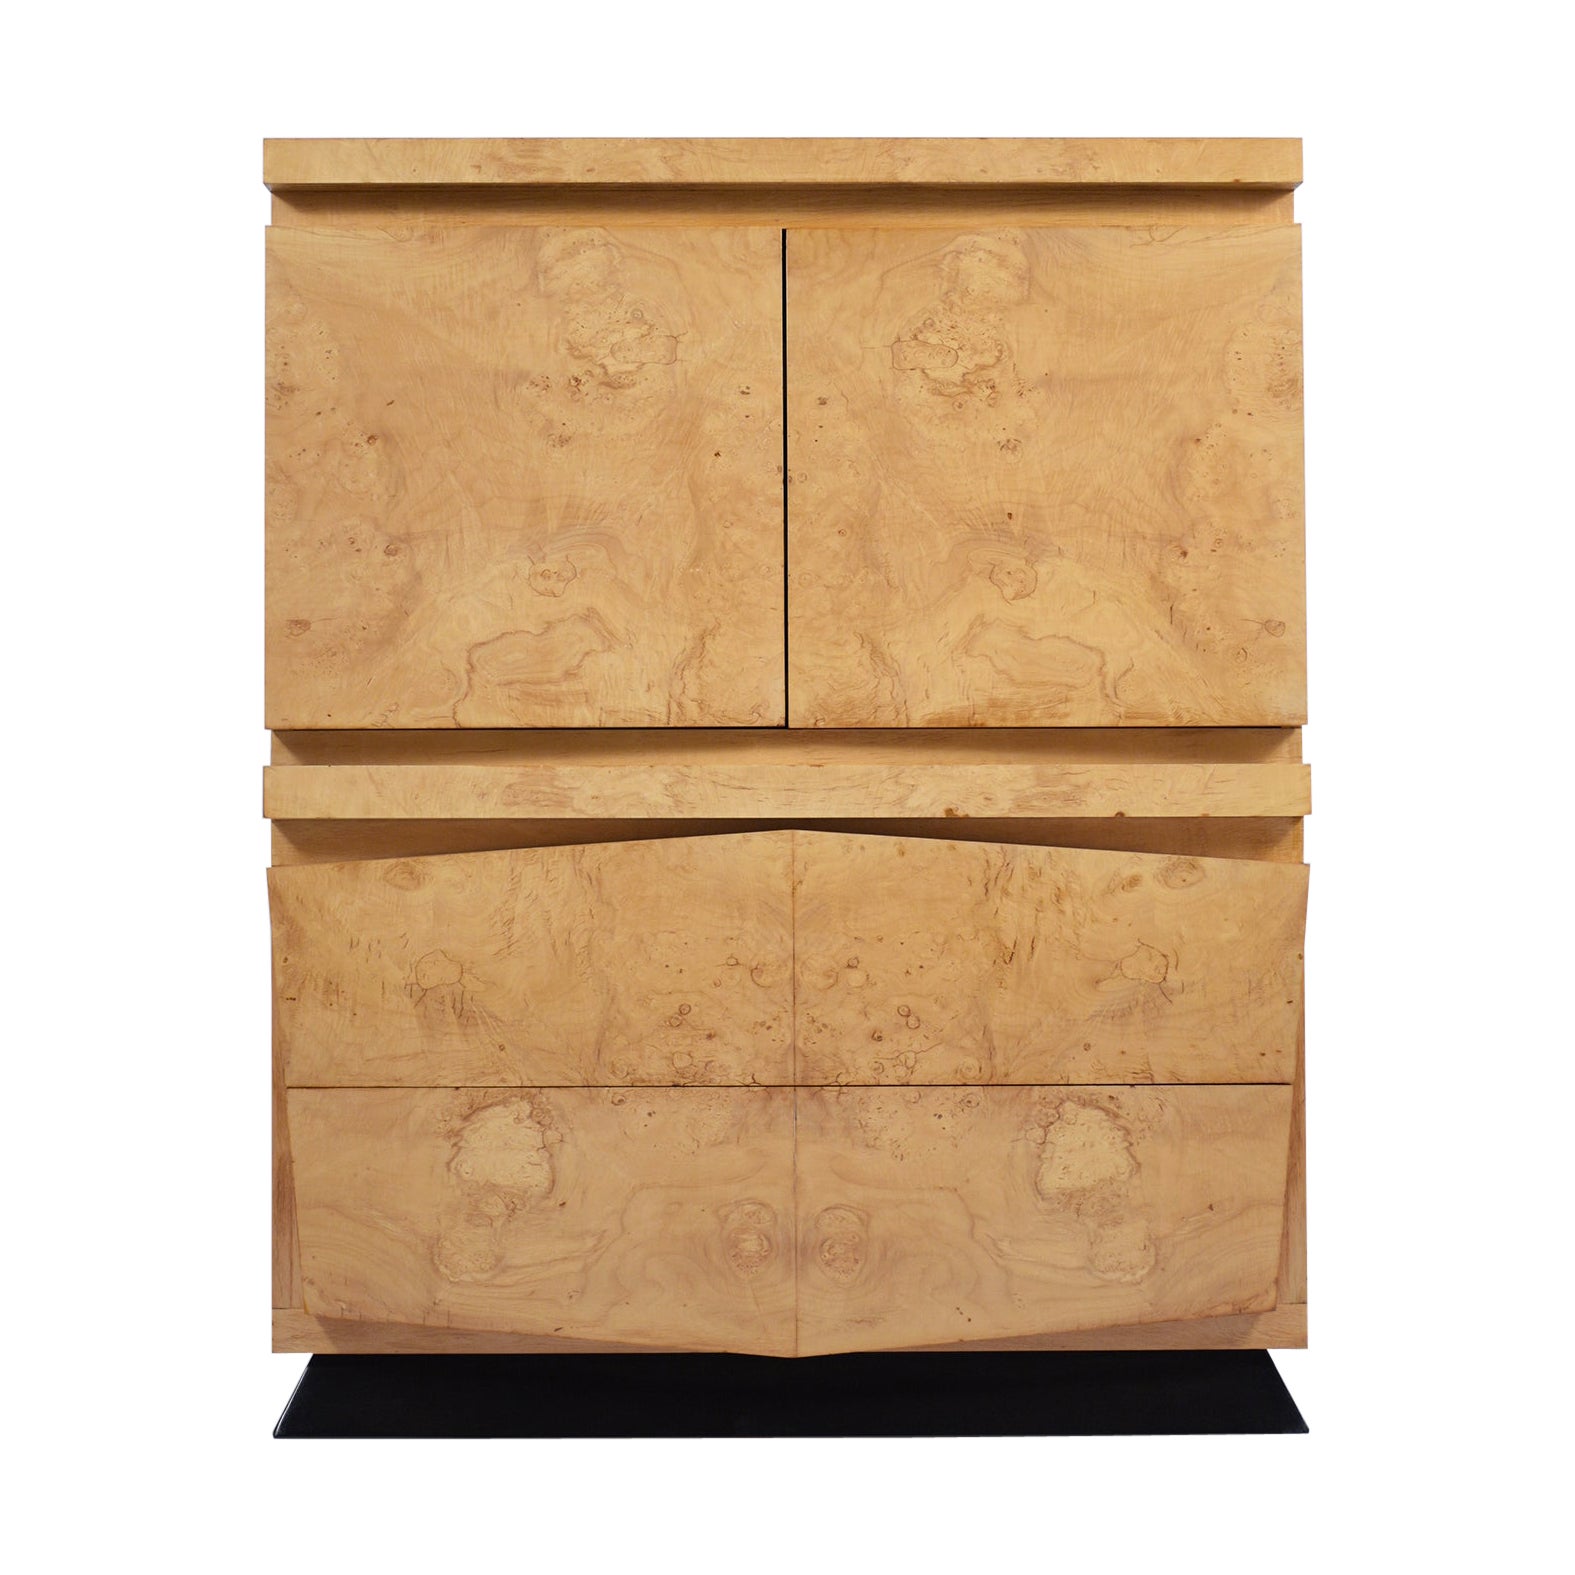 Restored Mid-Century Chest of Drawers: Maple Wood Elegance